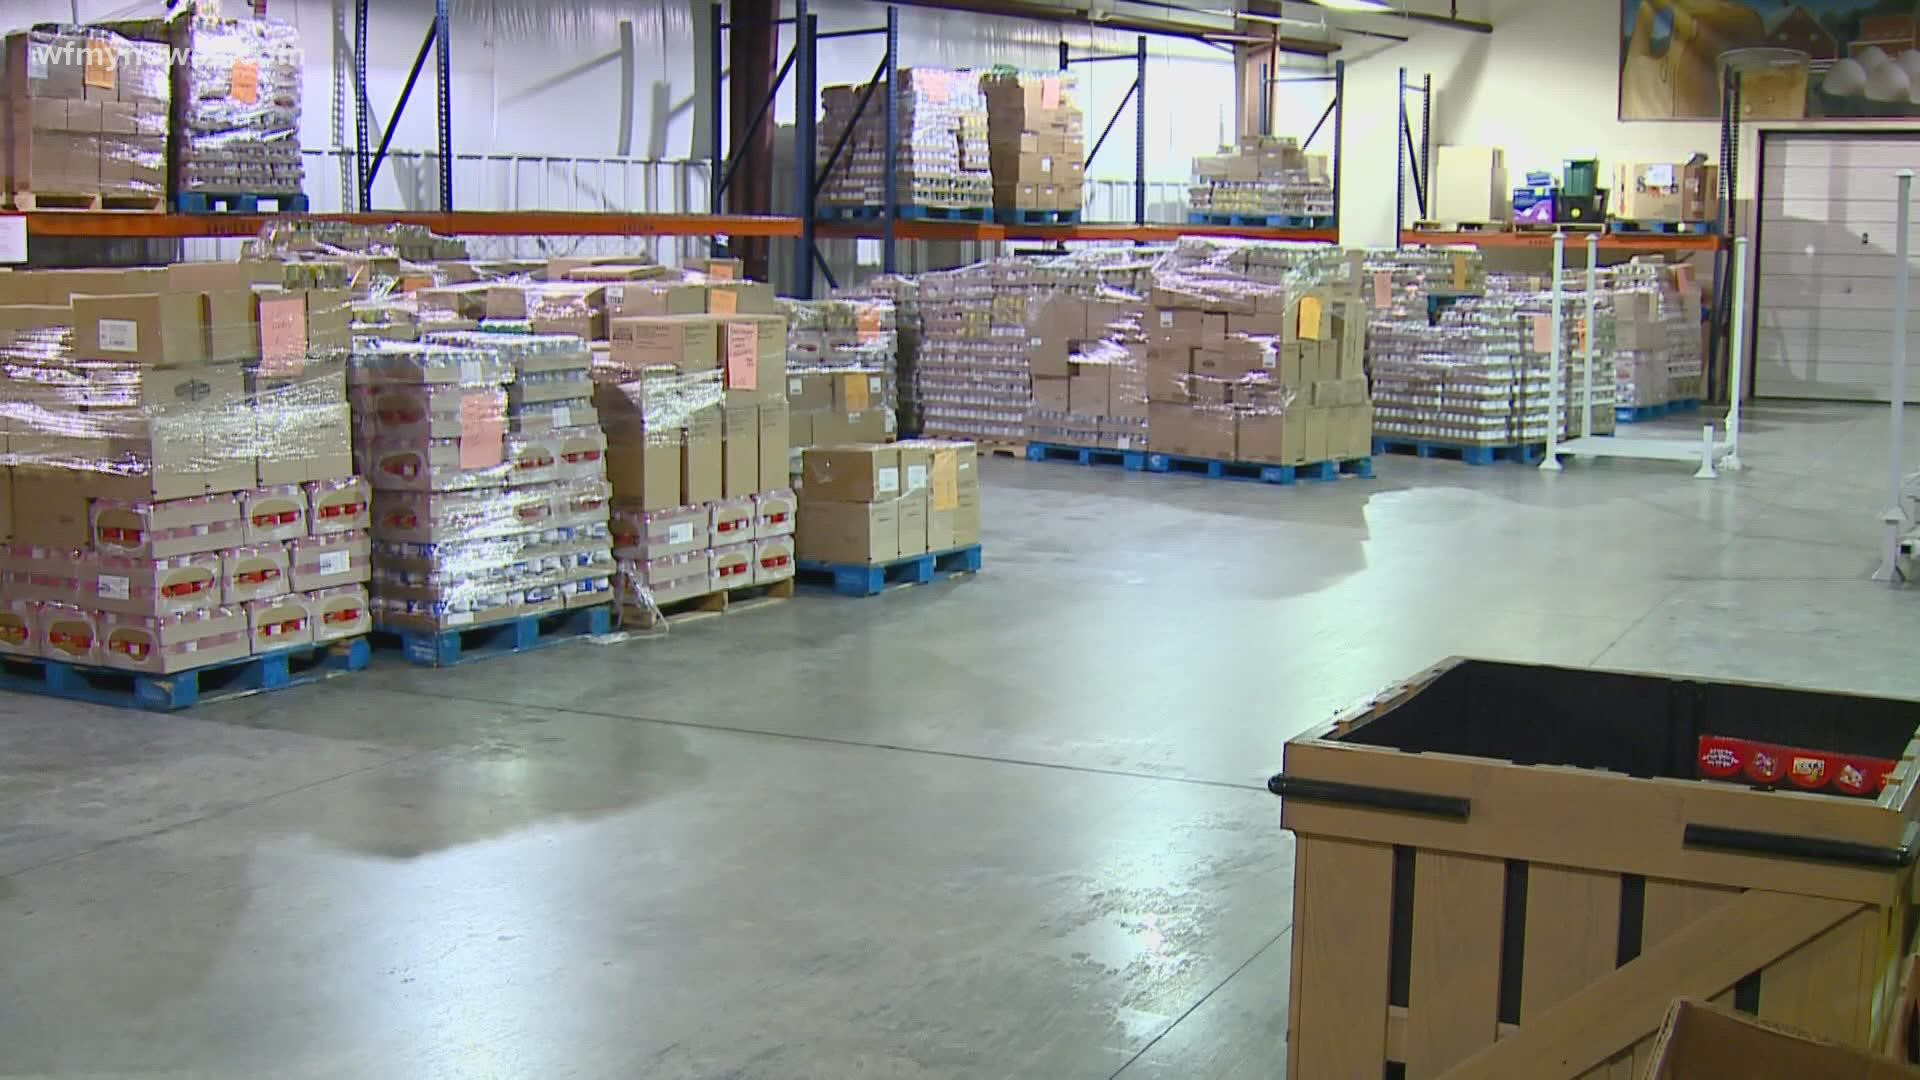 The Second Harvest Food Bank celebrates its 40th year feeding those struggling with food security in the Triad.